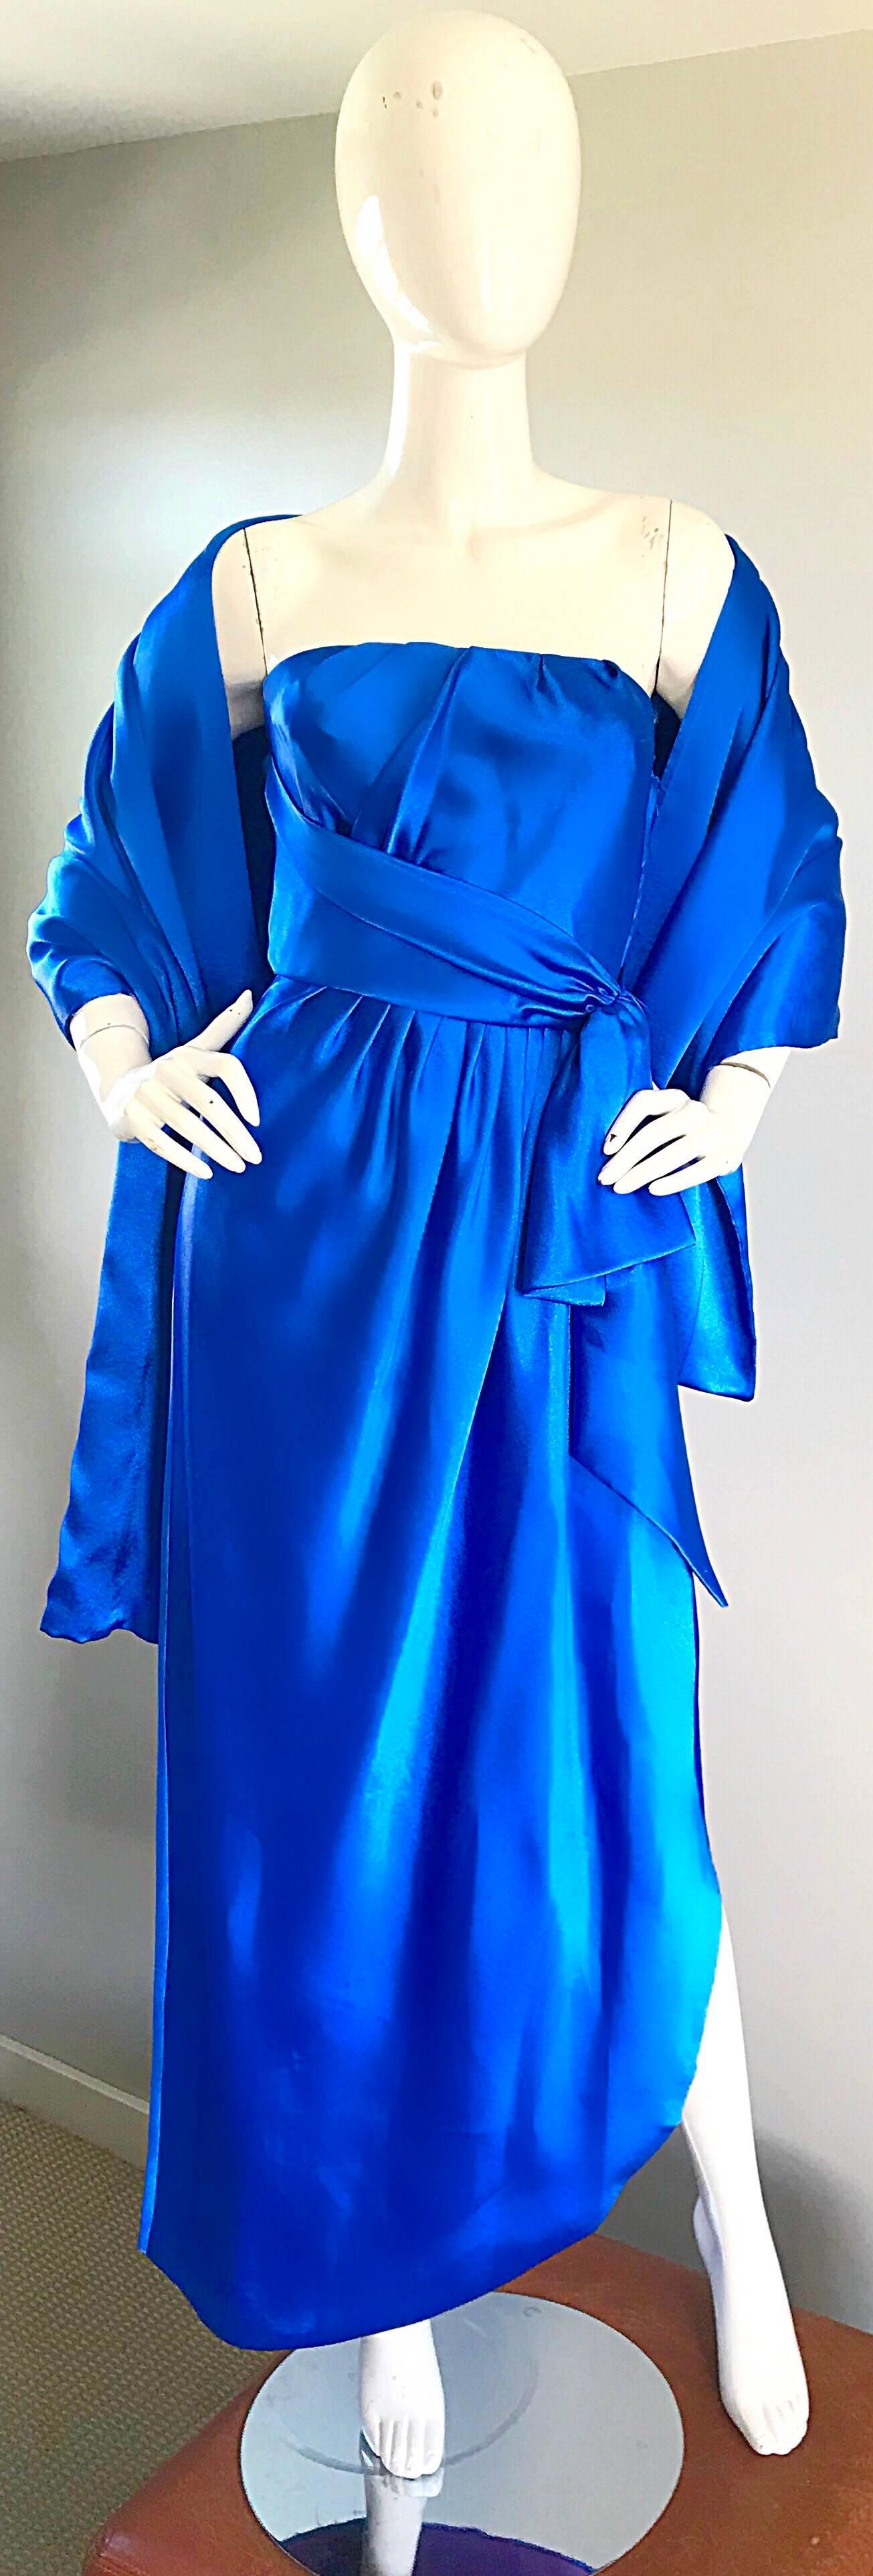 Gorgeous vintage 1970s 70s FRANK USHER for NEIMAN MARCUS royal blue strapless satin evening dress and matching shawl! Features a fitted bodice, with attached side sash. Interior boned bodice keeps everything in place. Asymmetrical hemline reveals